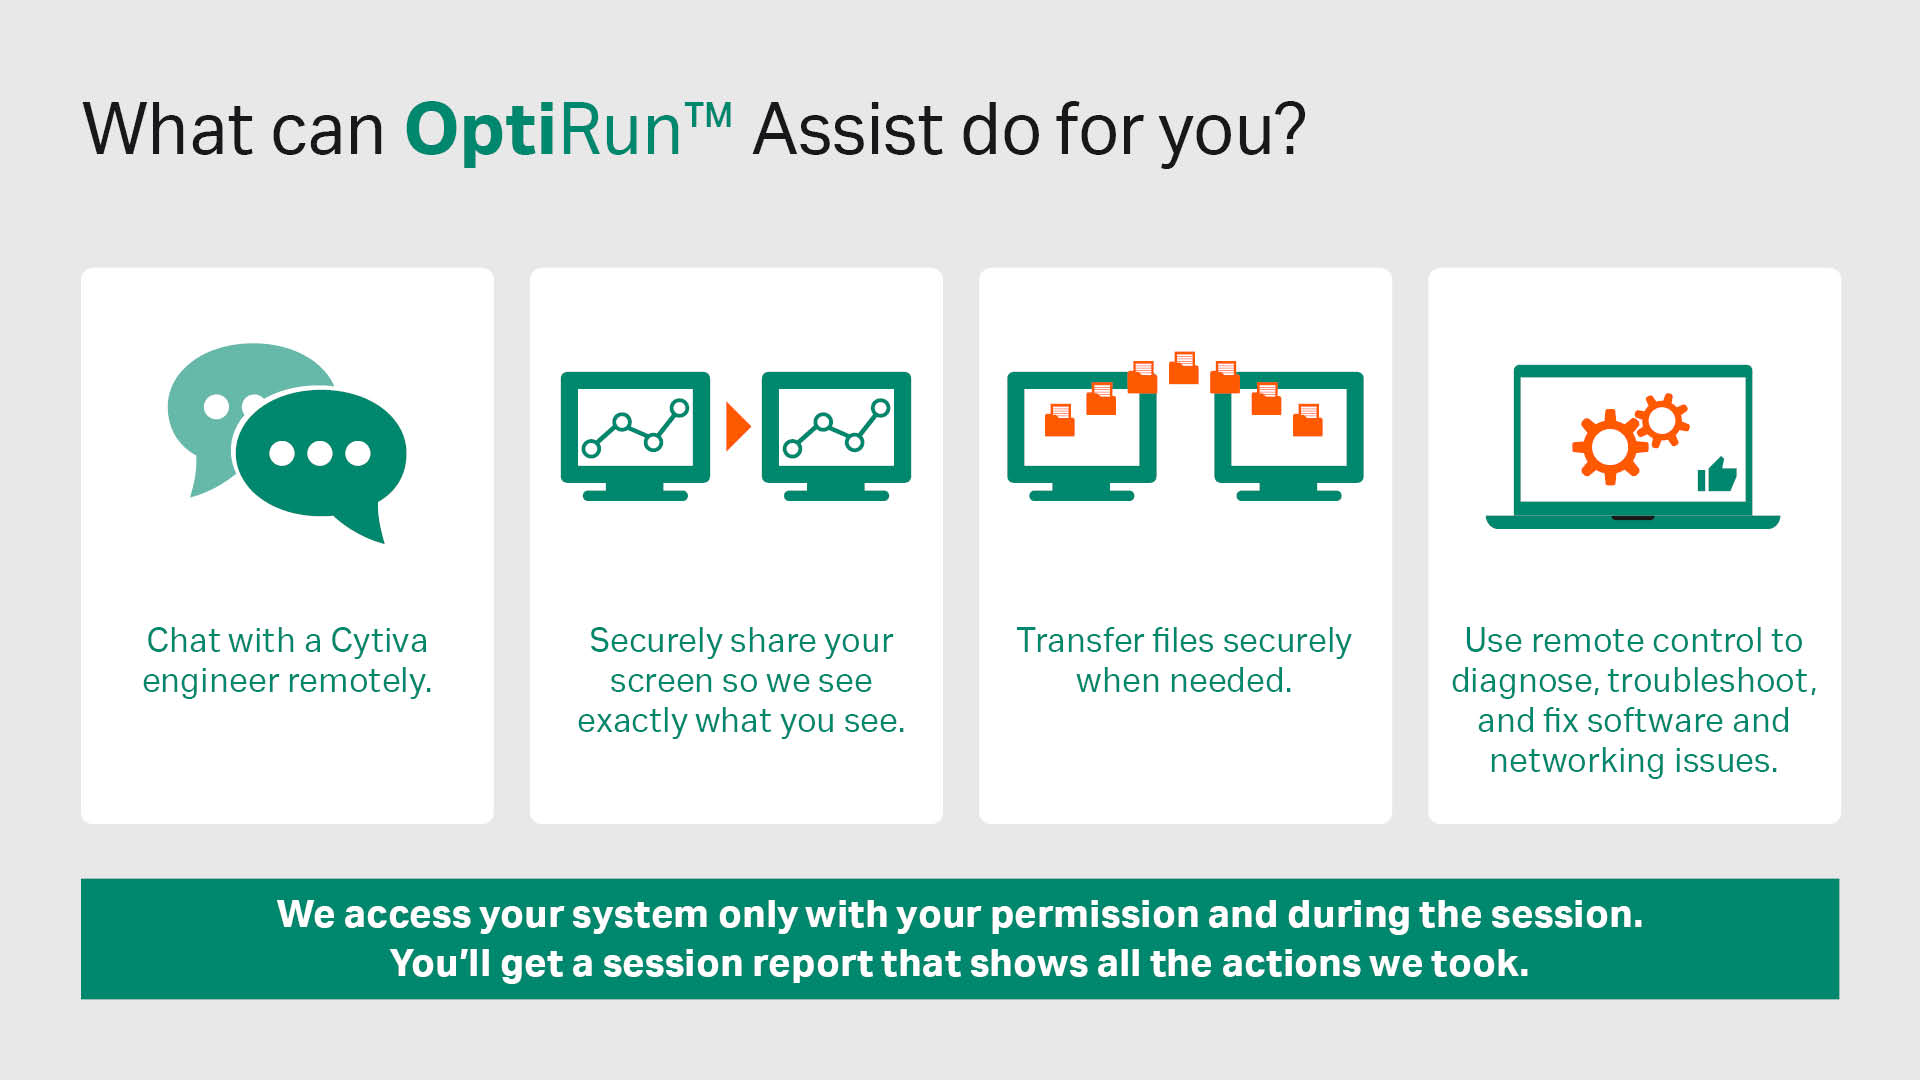 Find out how Cytiva service engineer can use OptiRun Assist technologies to help customers remotely